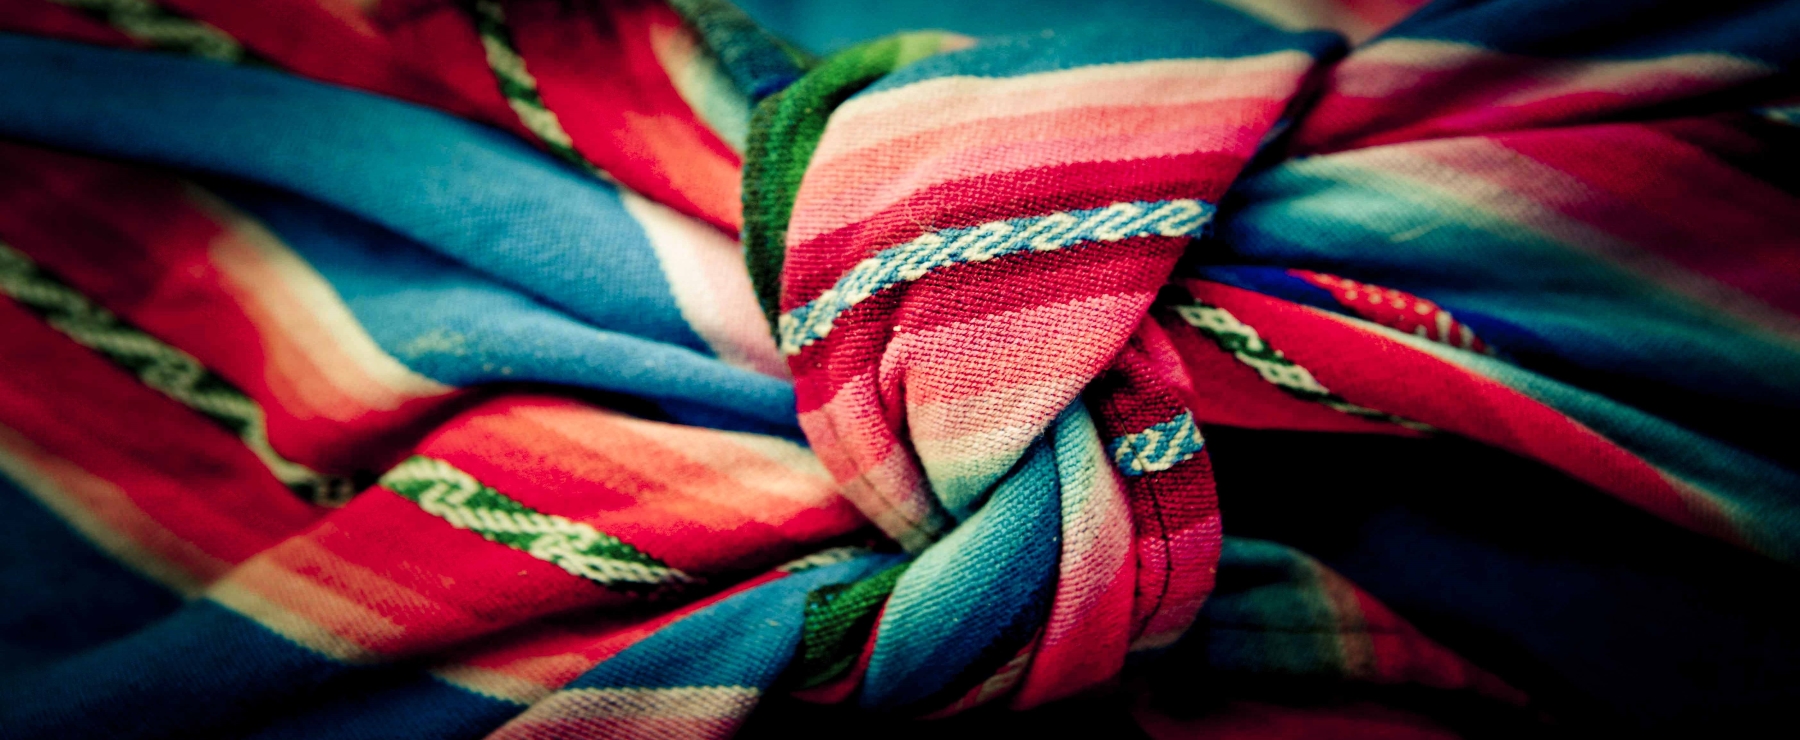 Typical Blanket - Atelier South America